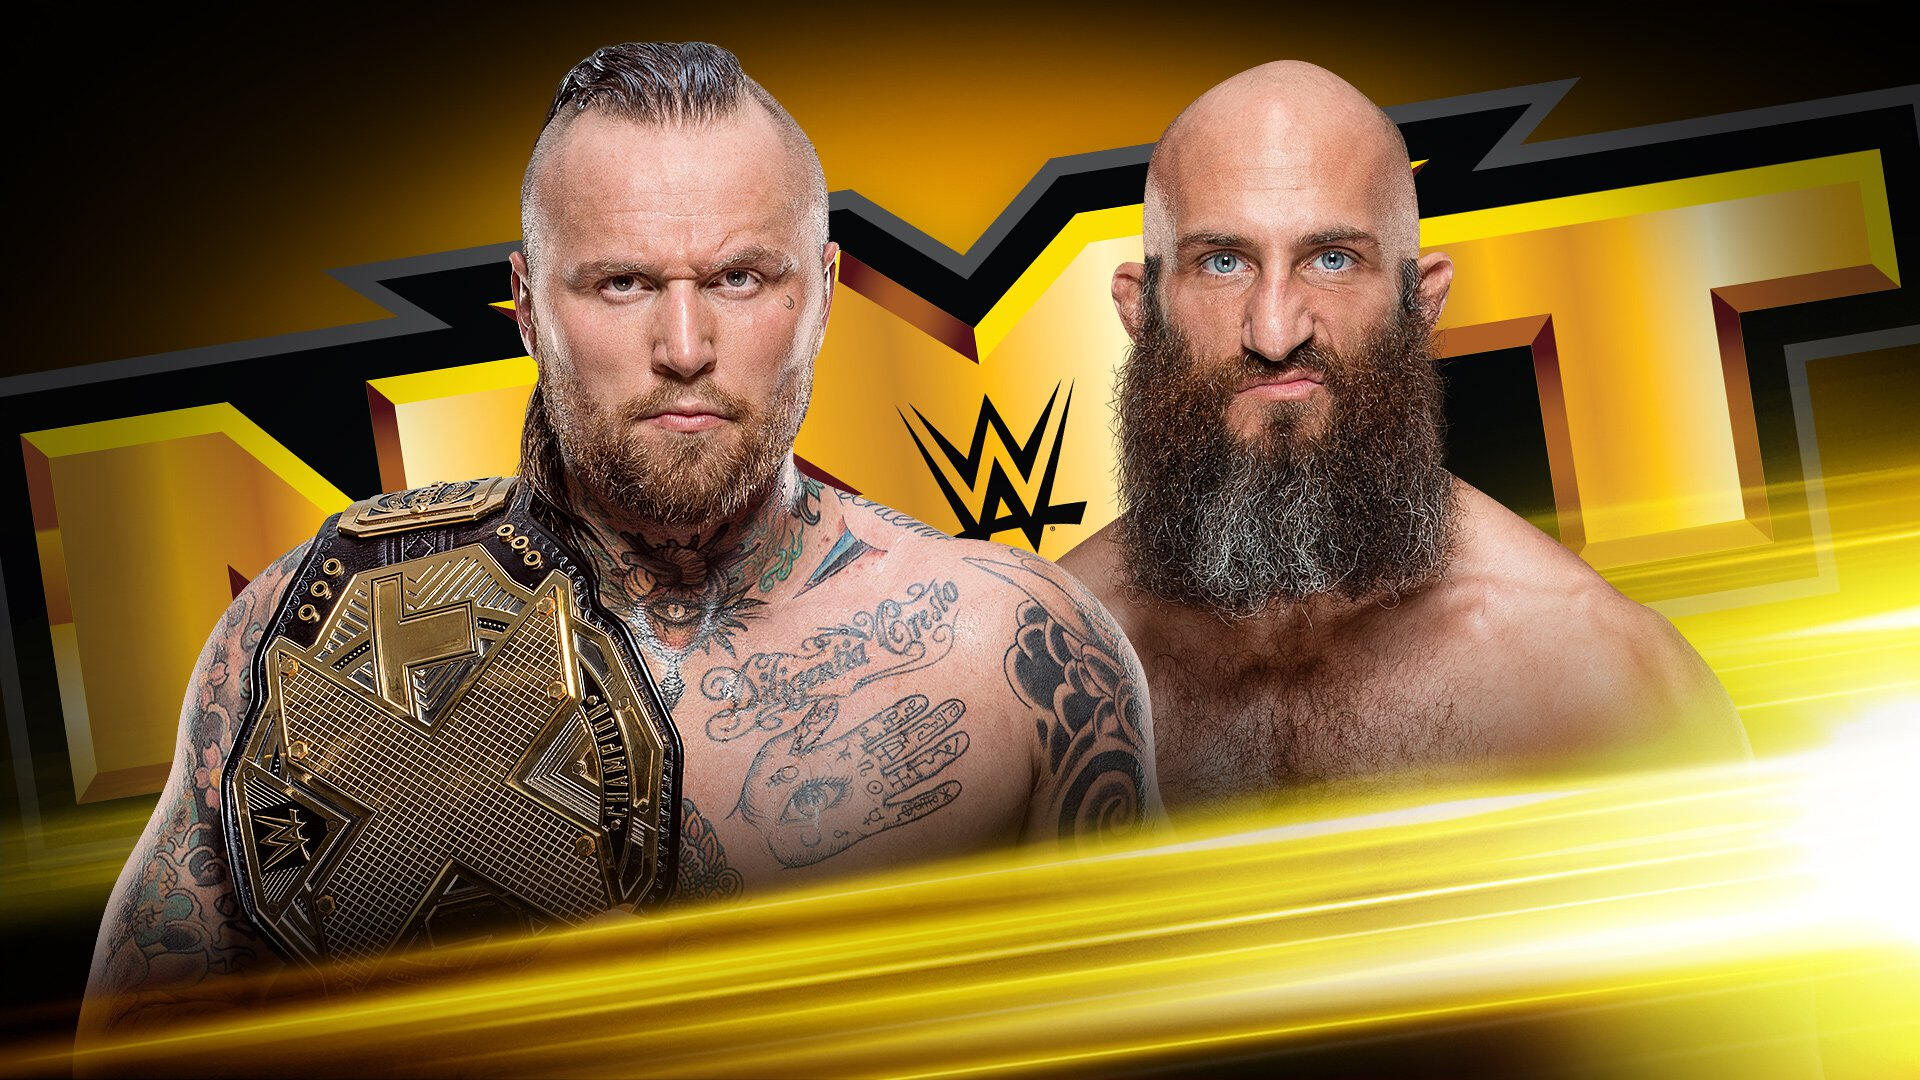 20180703_MatchGraphic_NXT_AleisterCiampa--26aa7d92082e669558f6c89acb50afe0.jpg